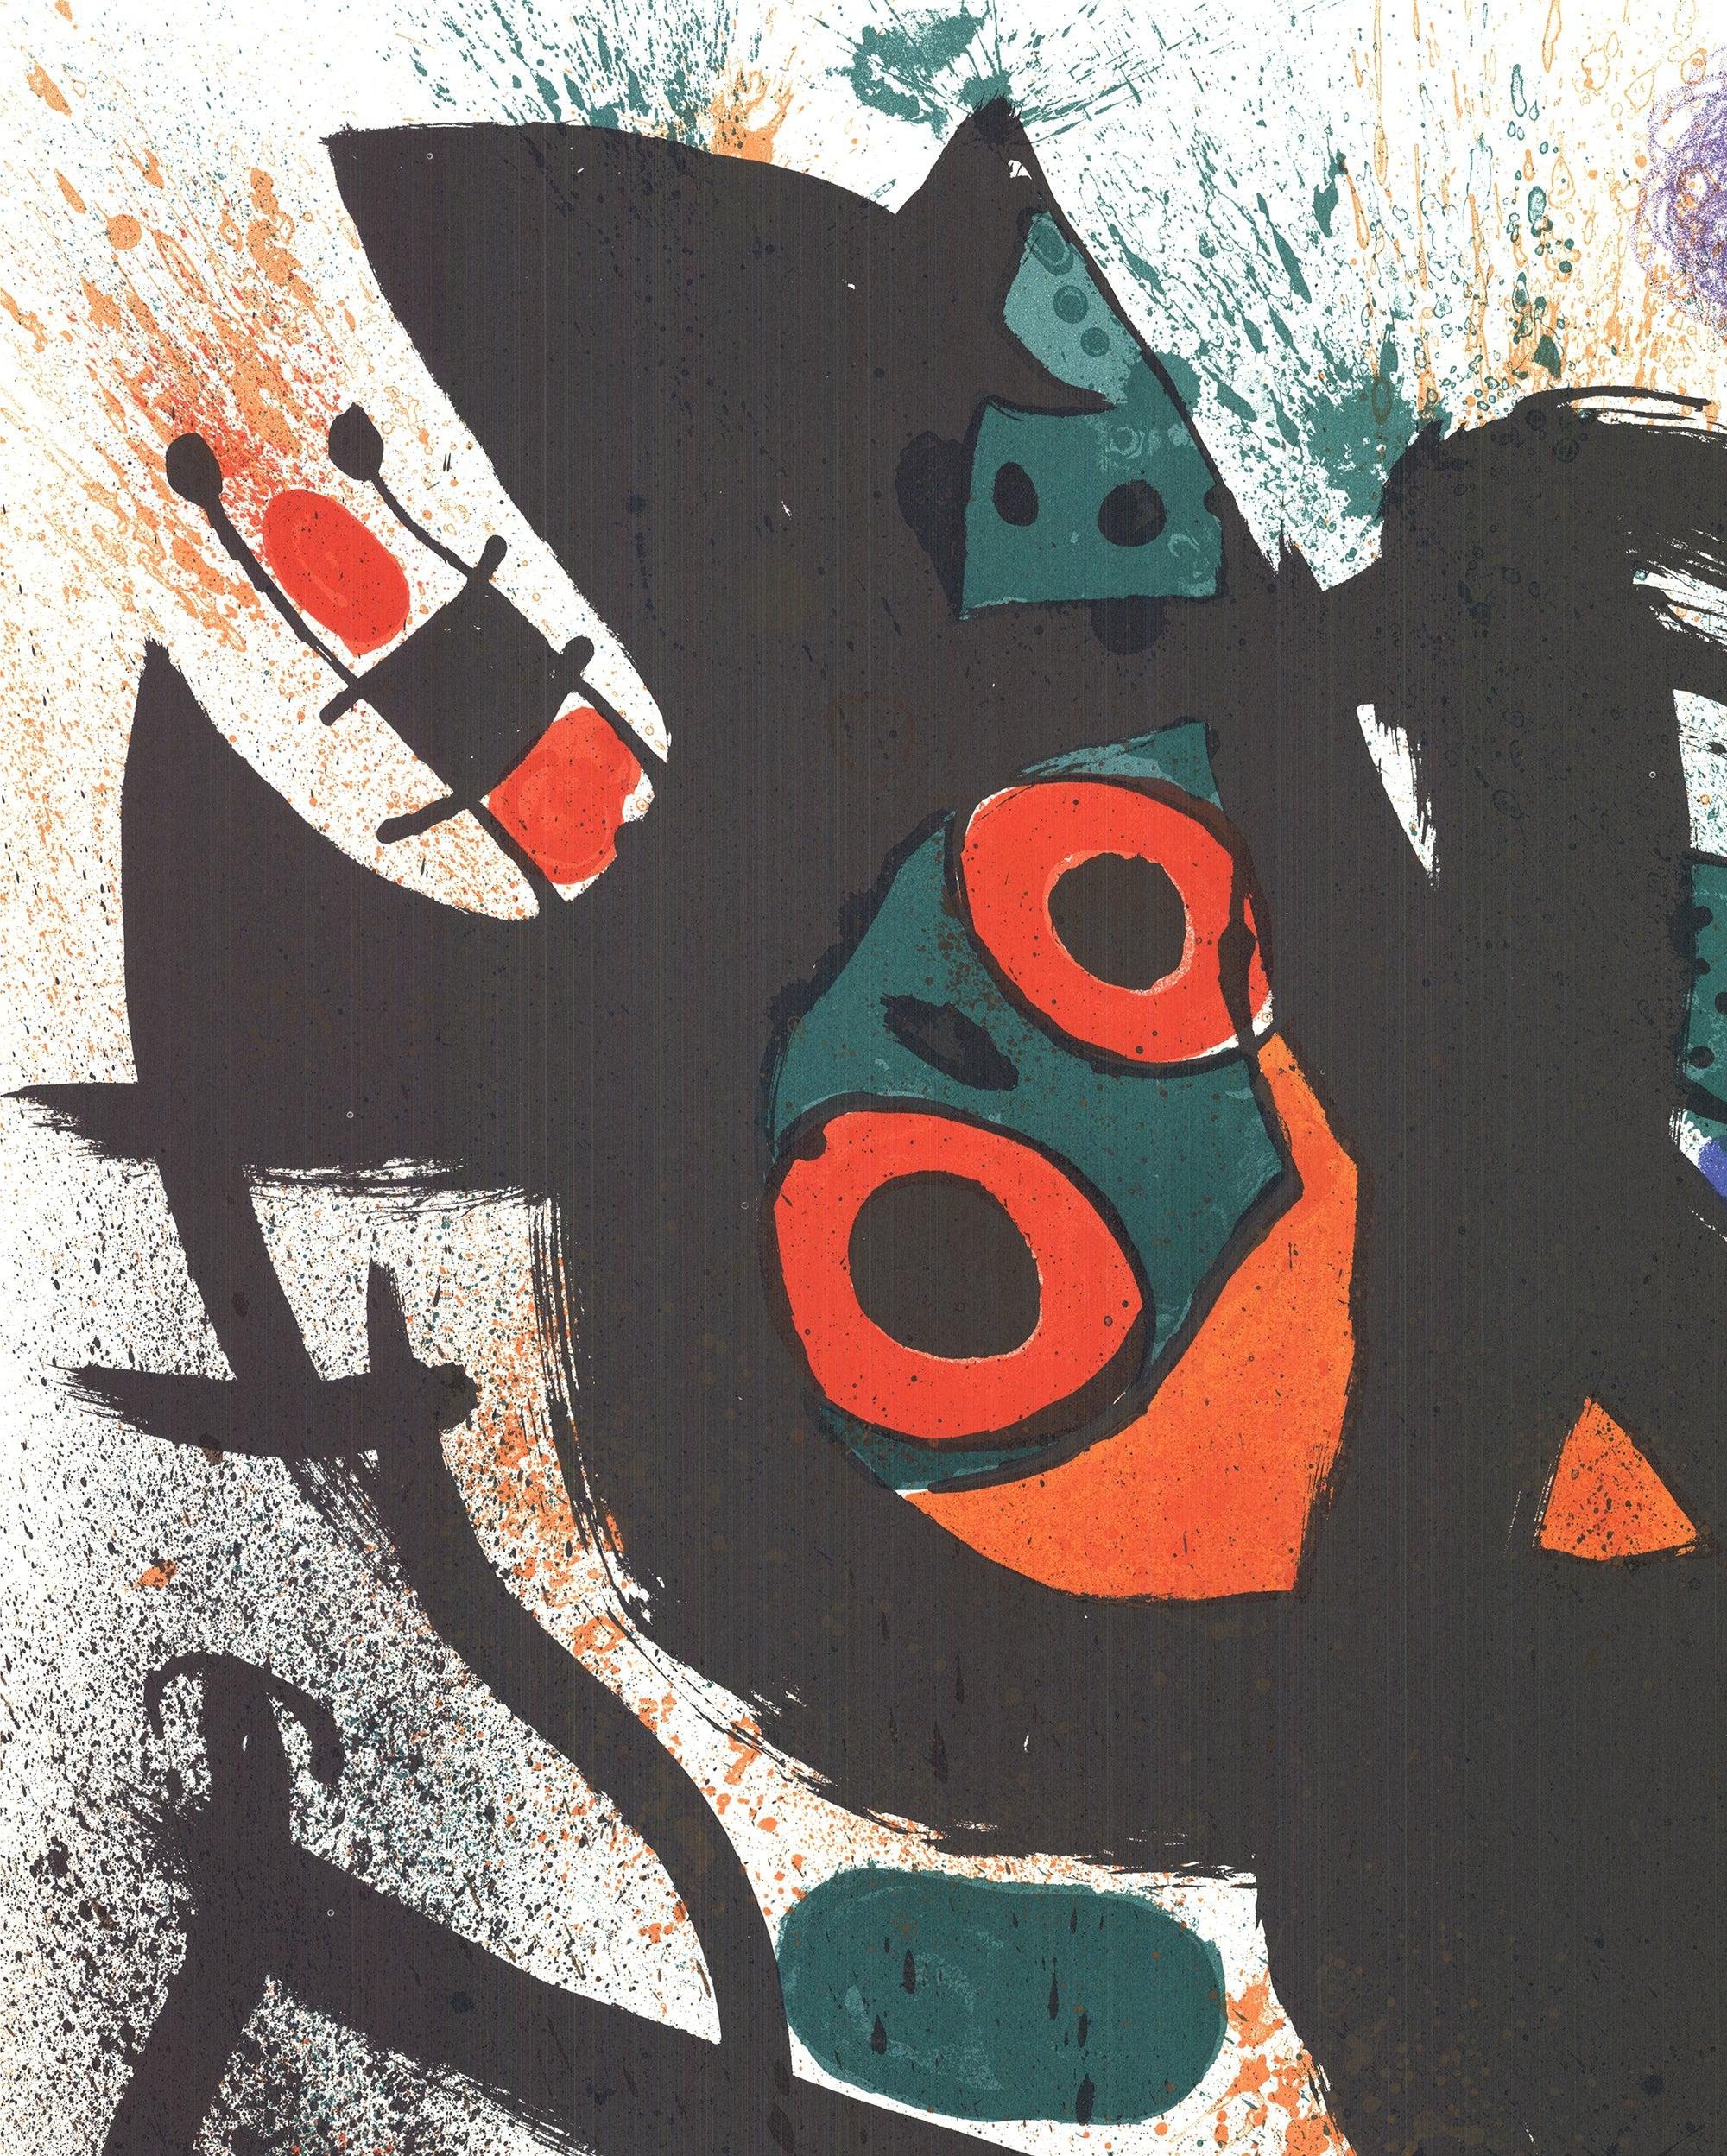 Artist: Joan Miro
Title: Pasadena Art Museum Exhibition
Year: 1969
Signed: No
Medium: Lithograph
Paper Size: 31.5 x 22.5 inches ( 80.01 x 57.15 cm )
Image Size: 24.5 x 19 inches ( 62.23 x 48.26 cm )
Edition Size: 2000
Framed: No
Condition: A: